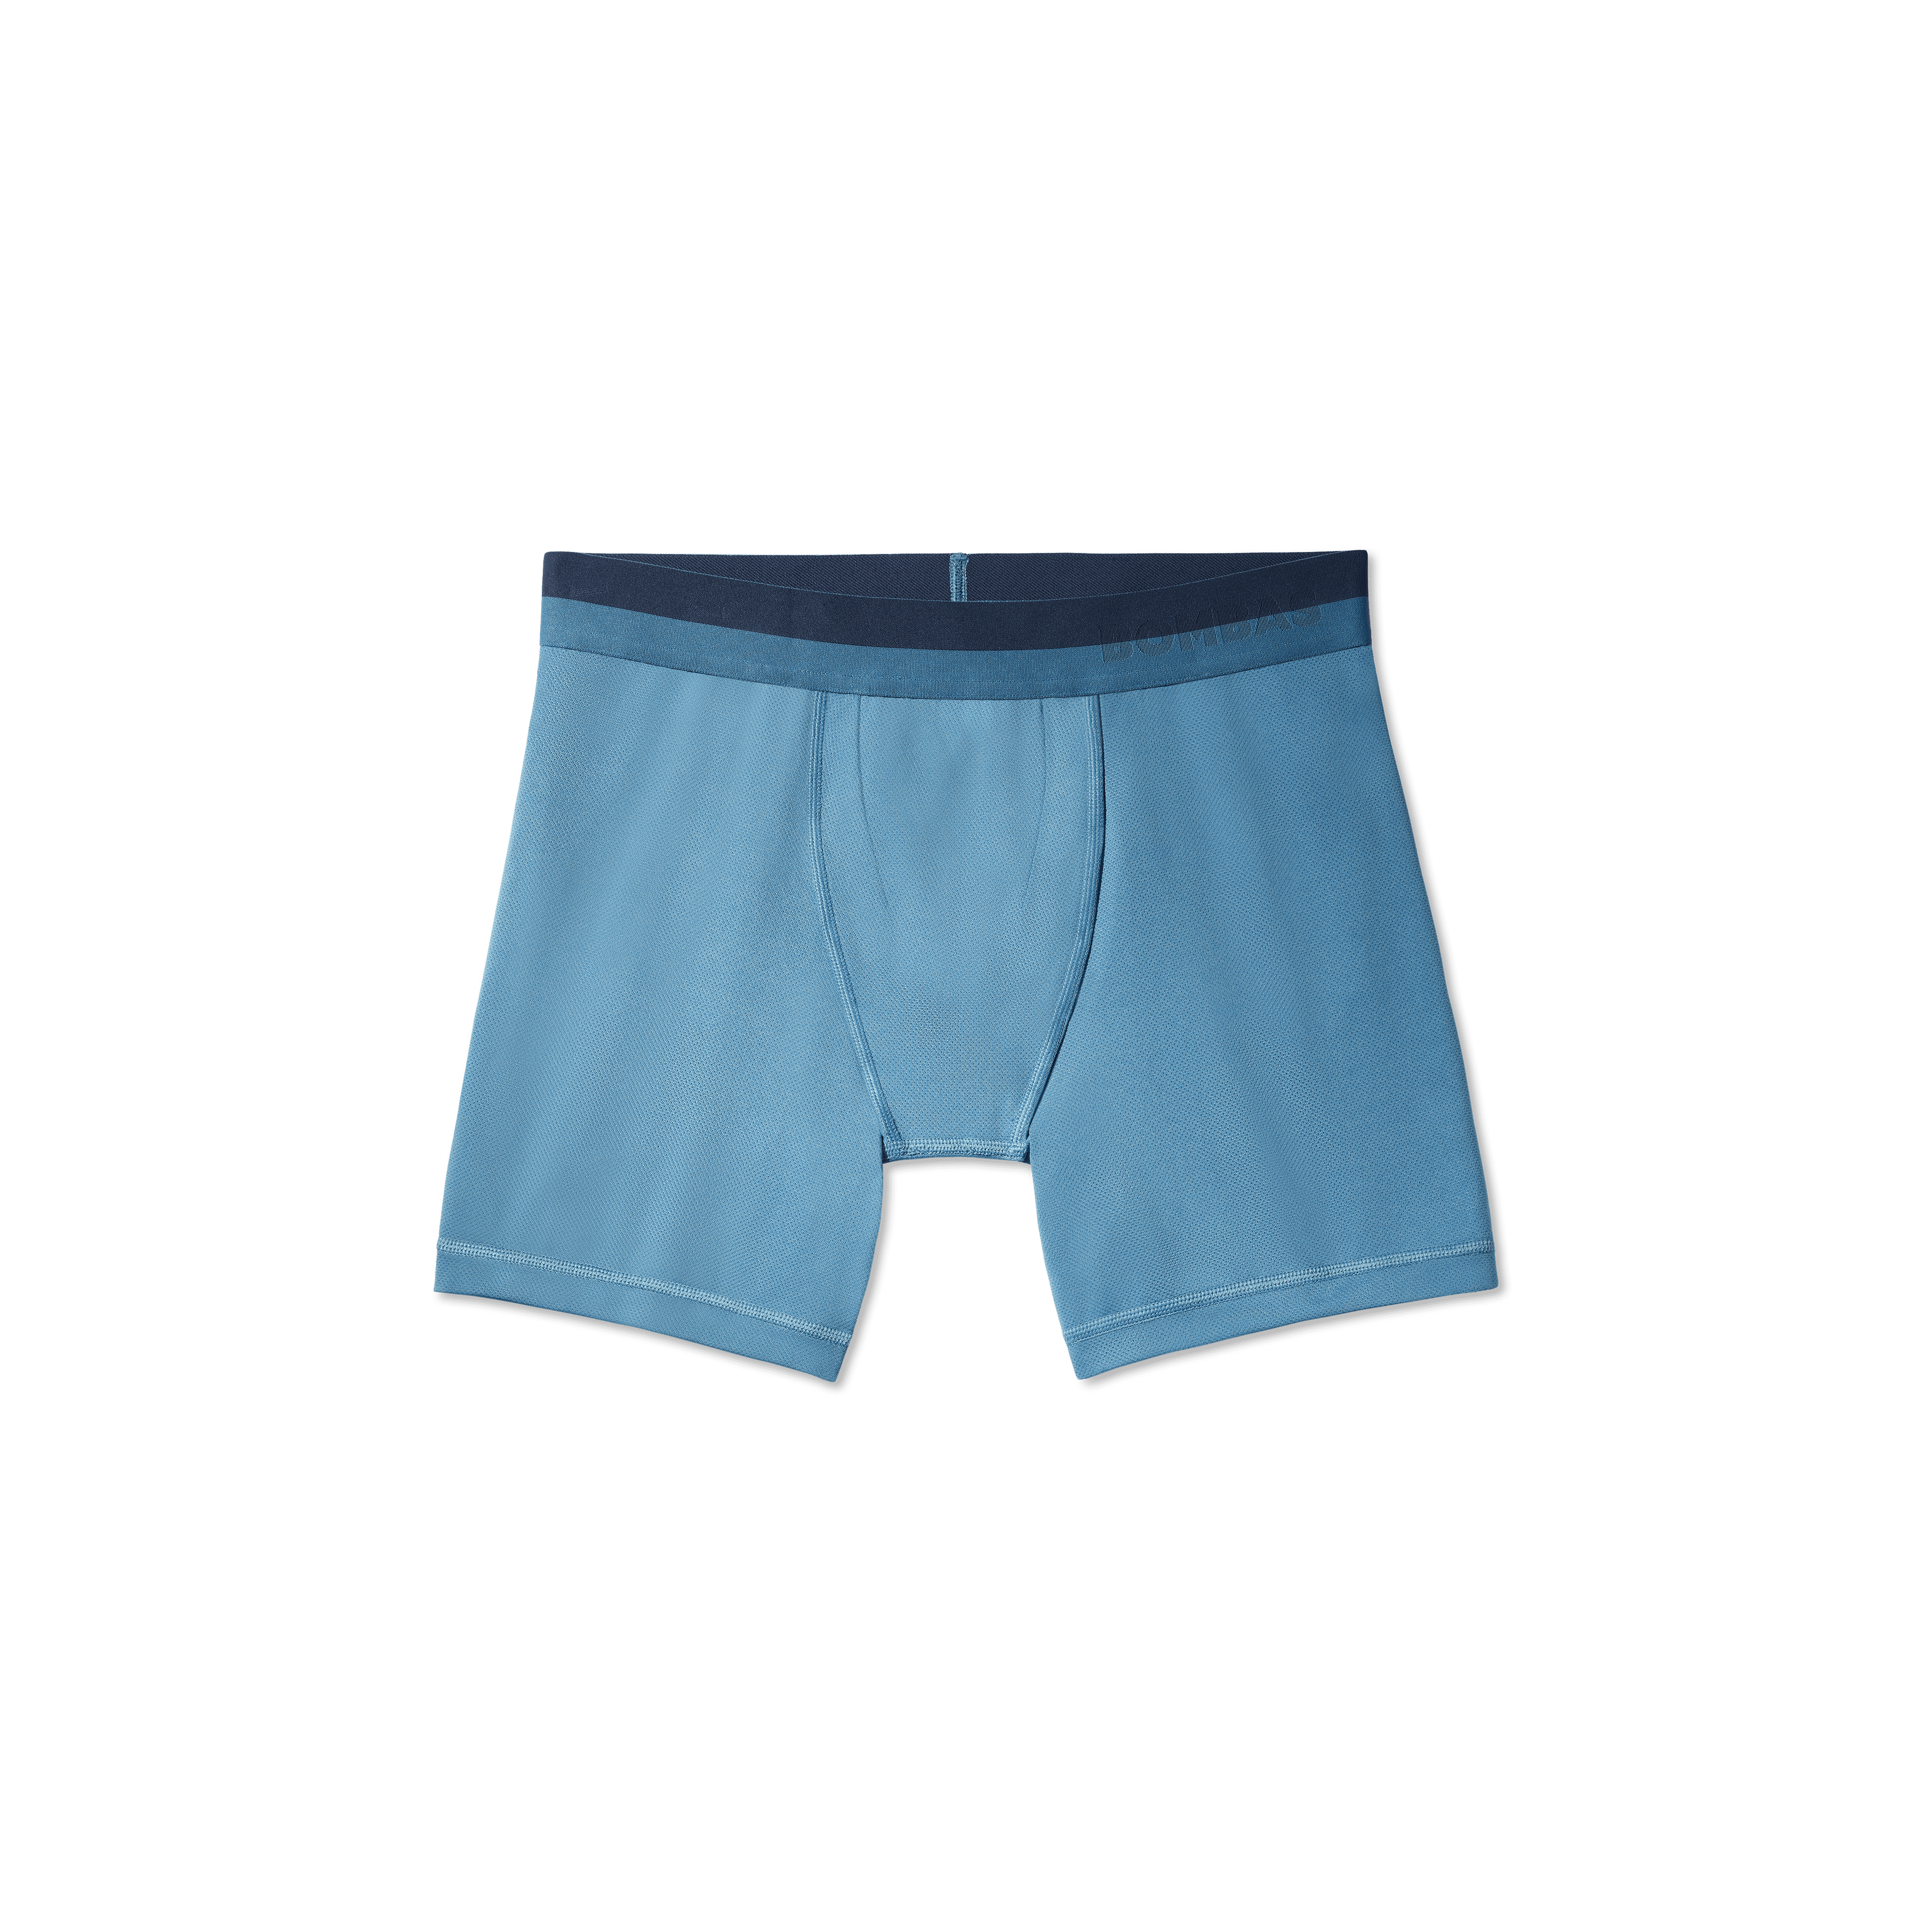 Shop High-Quality LOBBO Men's Sport Mesh Boxer Brief with Fly